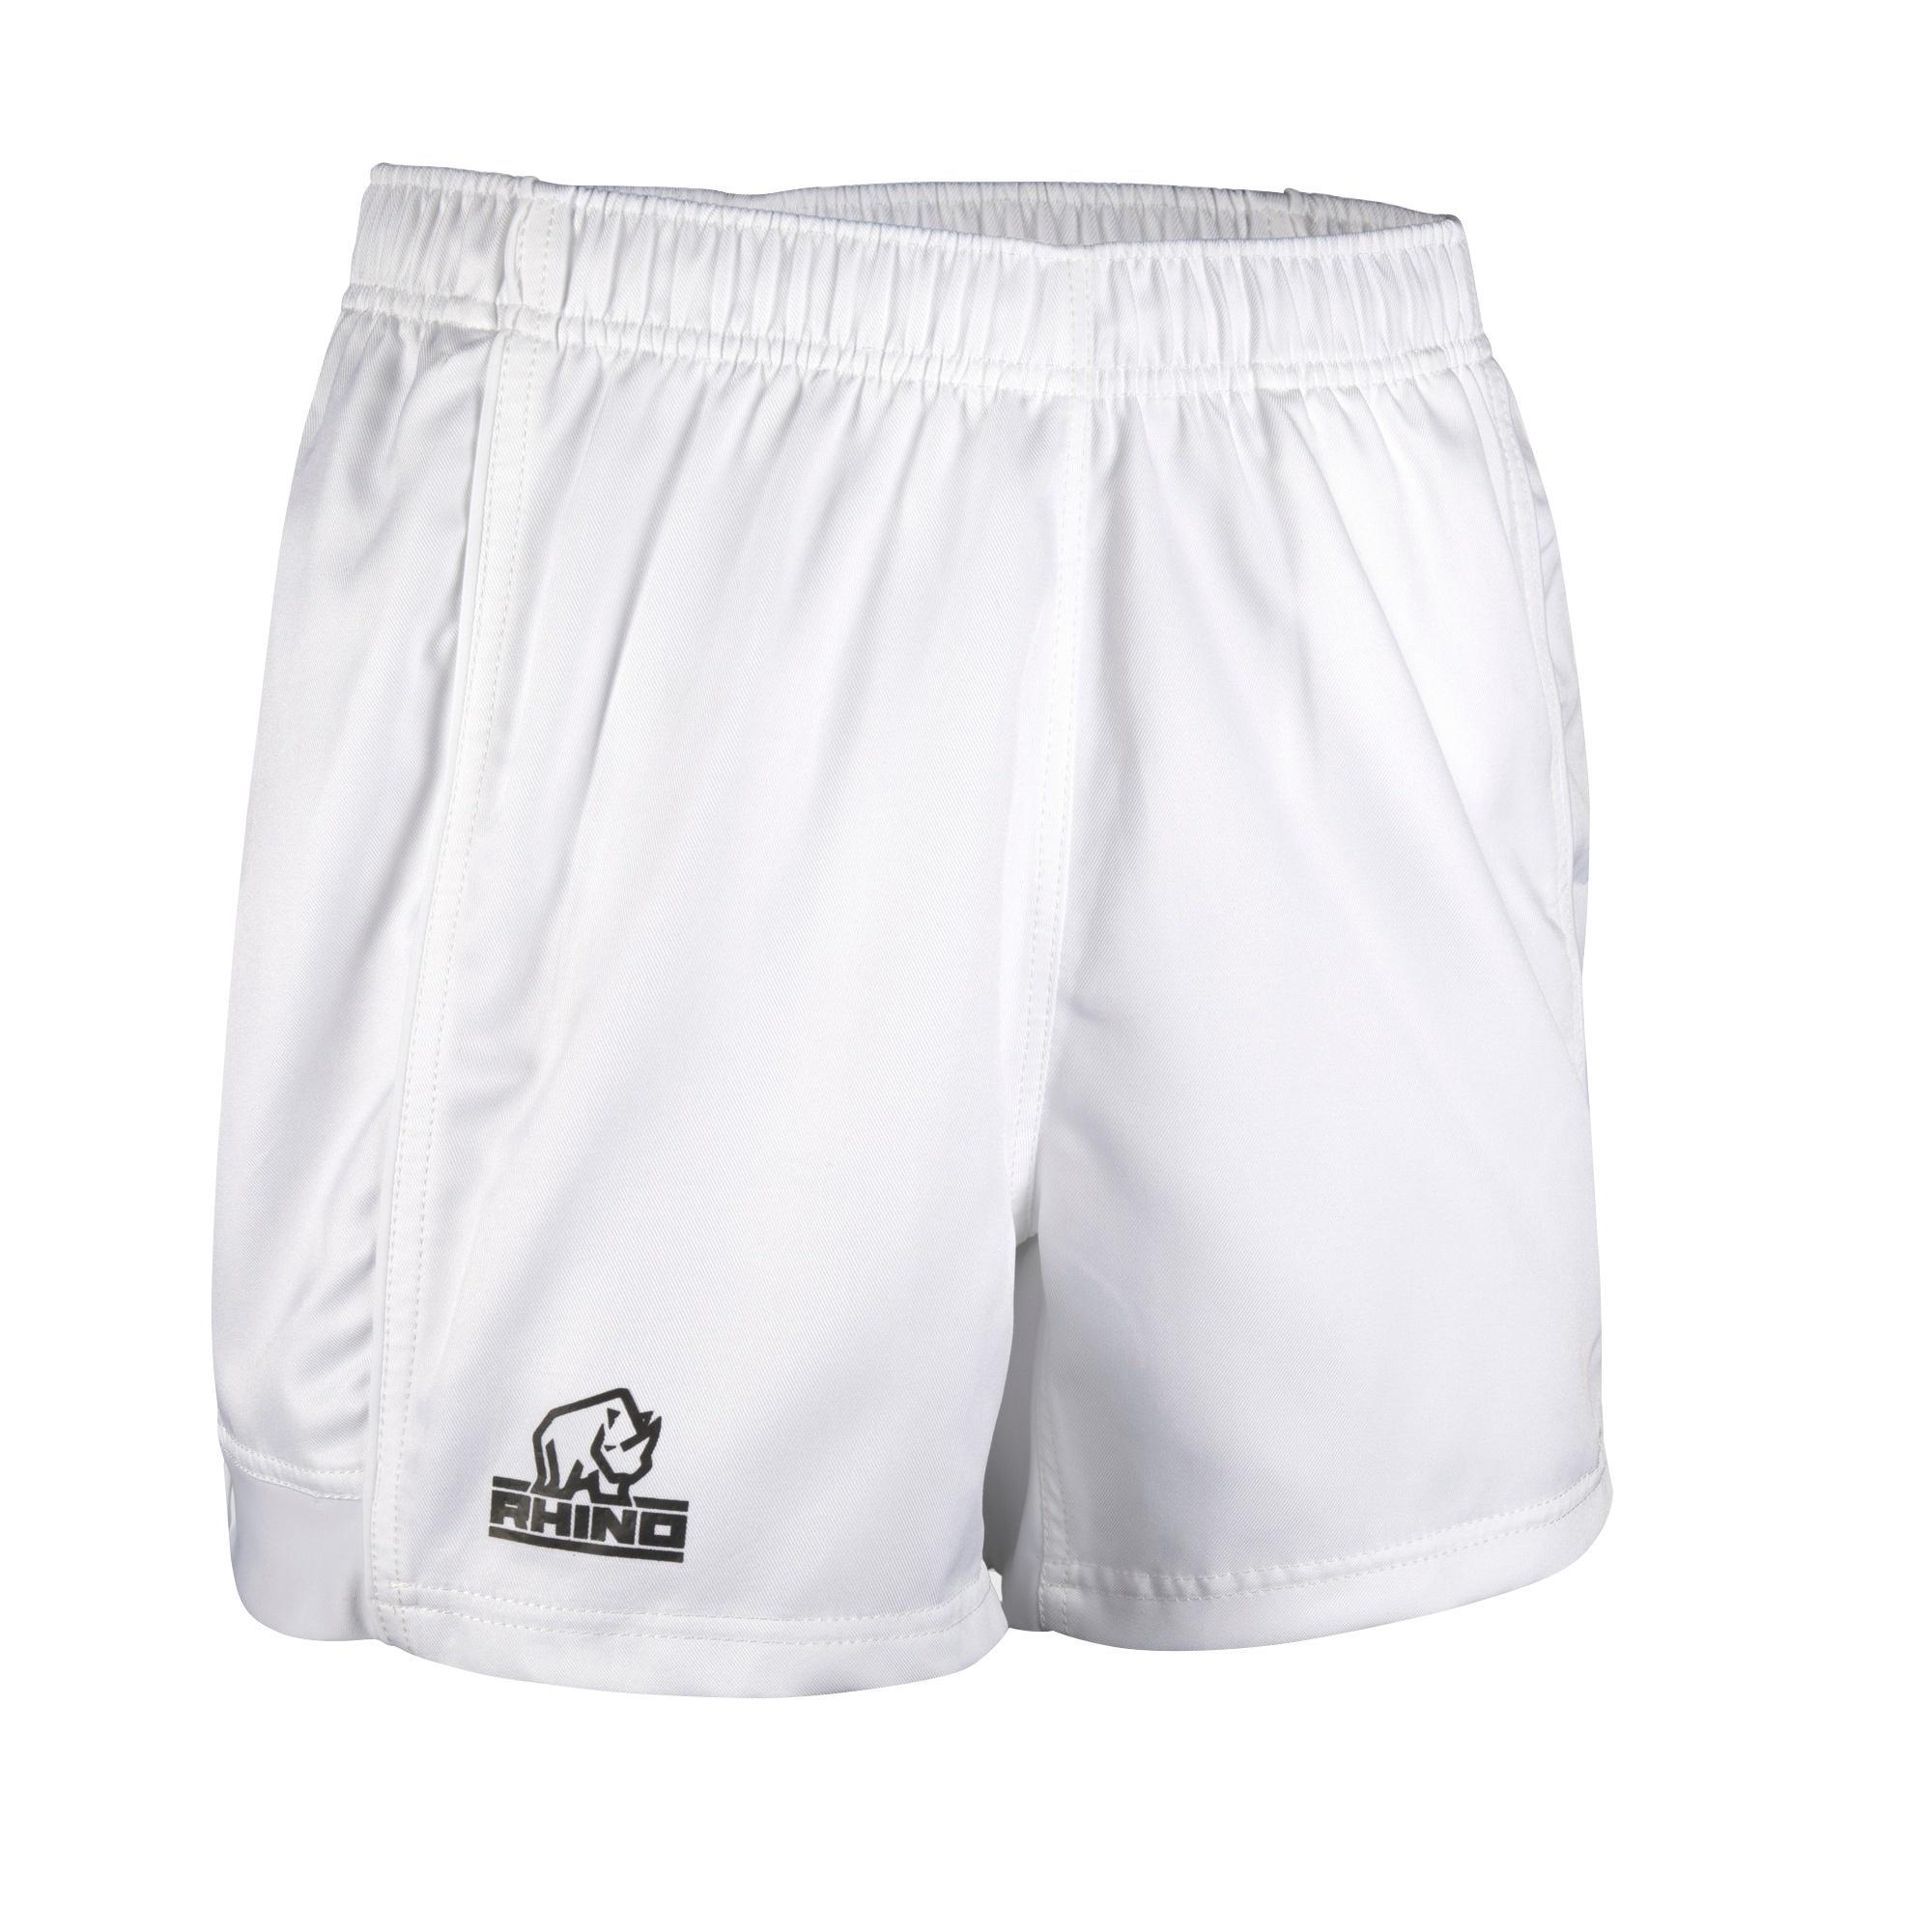 Rhino Childrens/Kids Auckland Rugby Shorts (White) (MB)